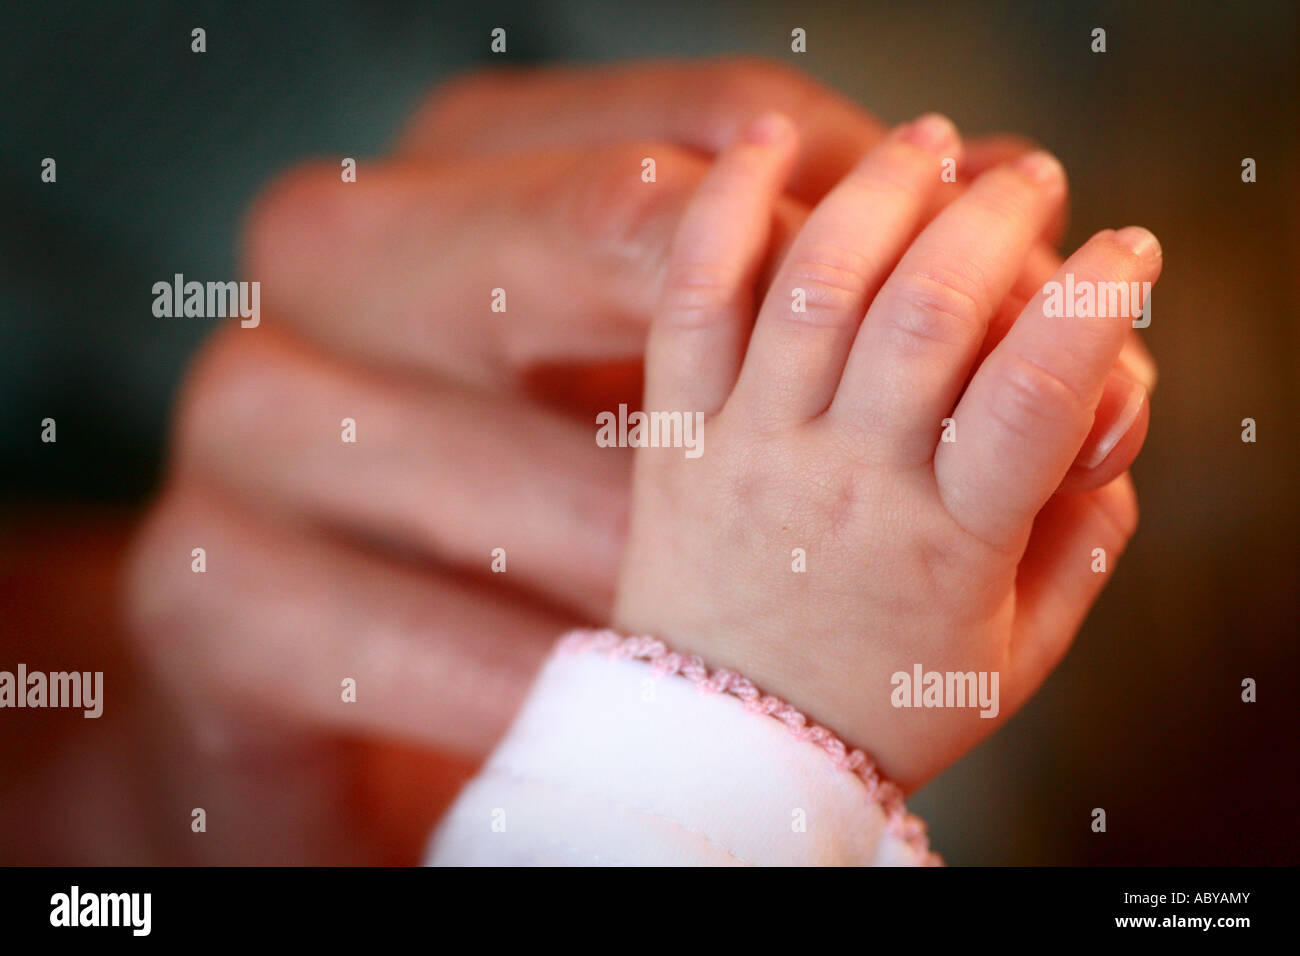 Closeup detail of the fragile hand and wrist of a newborn baby with tiny delicate fingers nails wrapped around parents finger Stock Photo